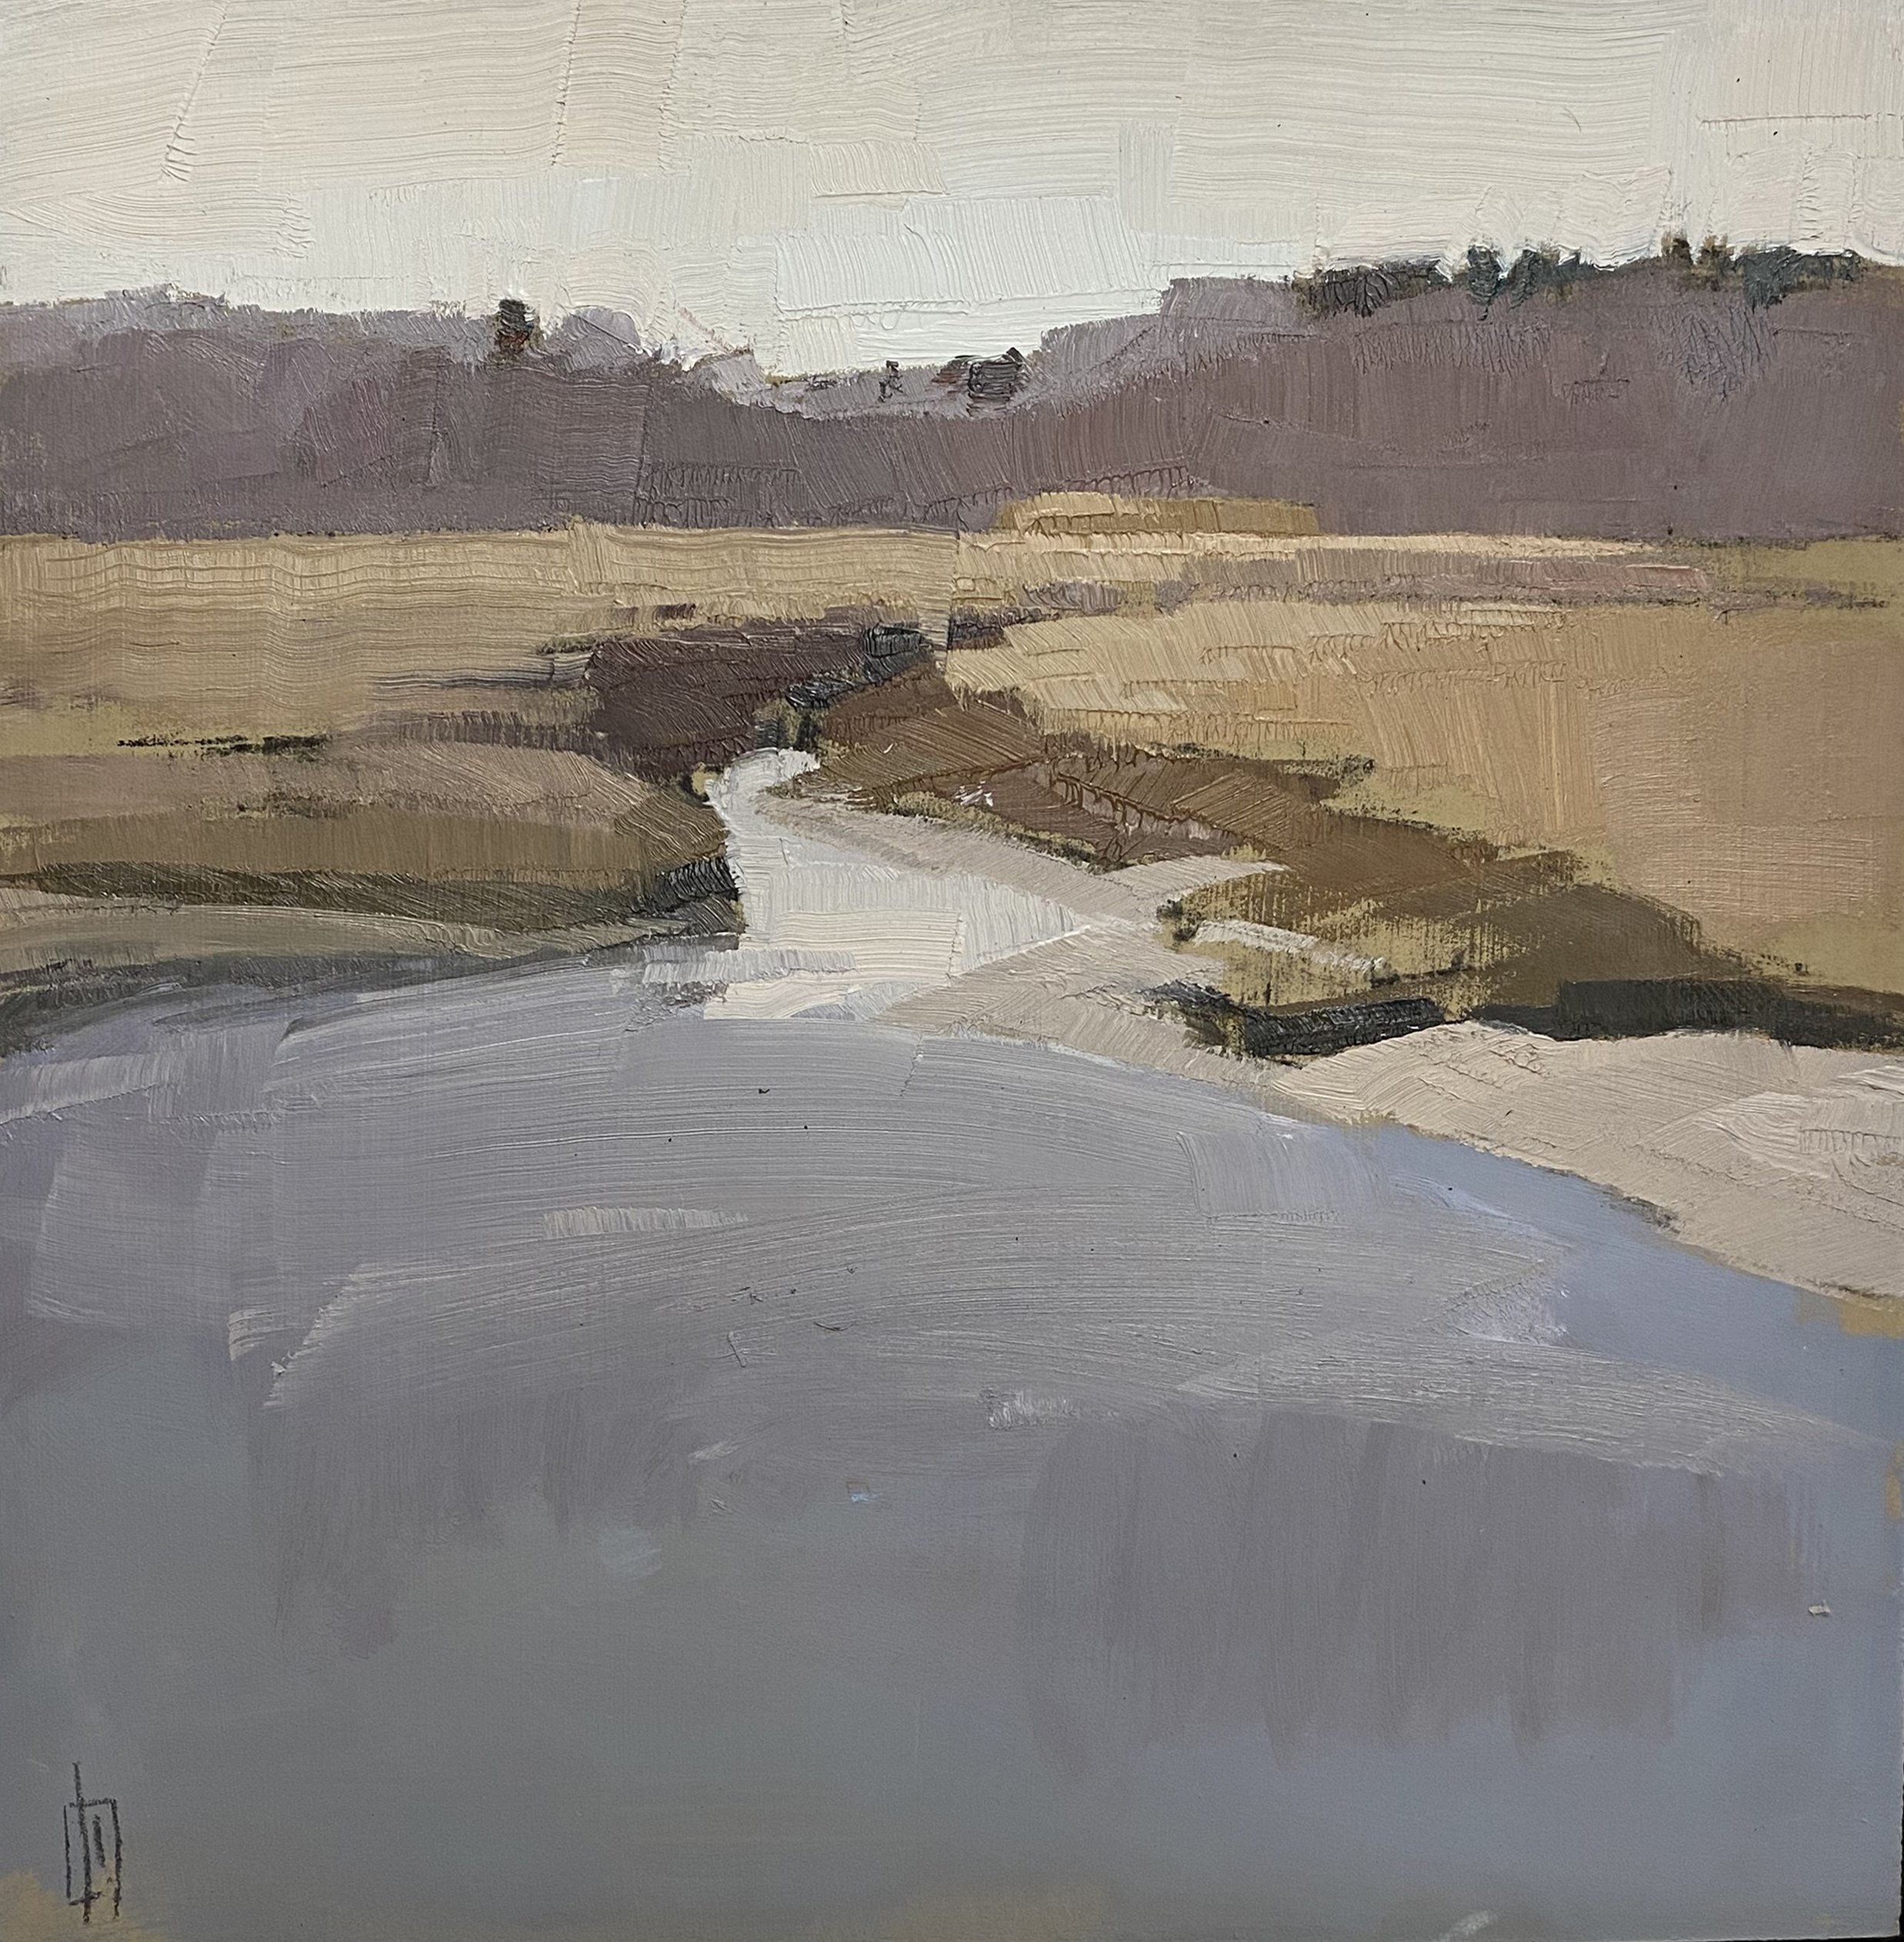   Marsh in Early Spring  12 x 12 oil on linen  sold  Islesford Artists Gallery 